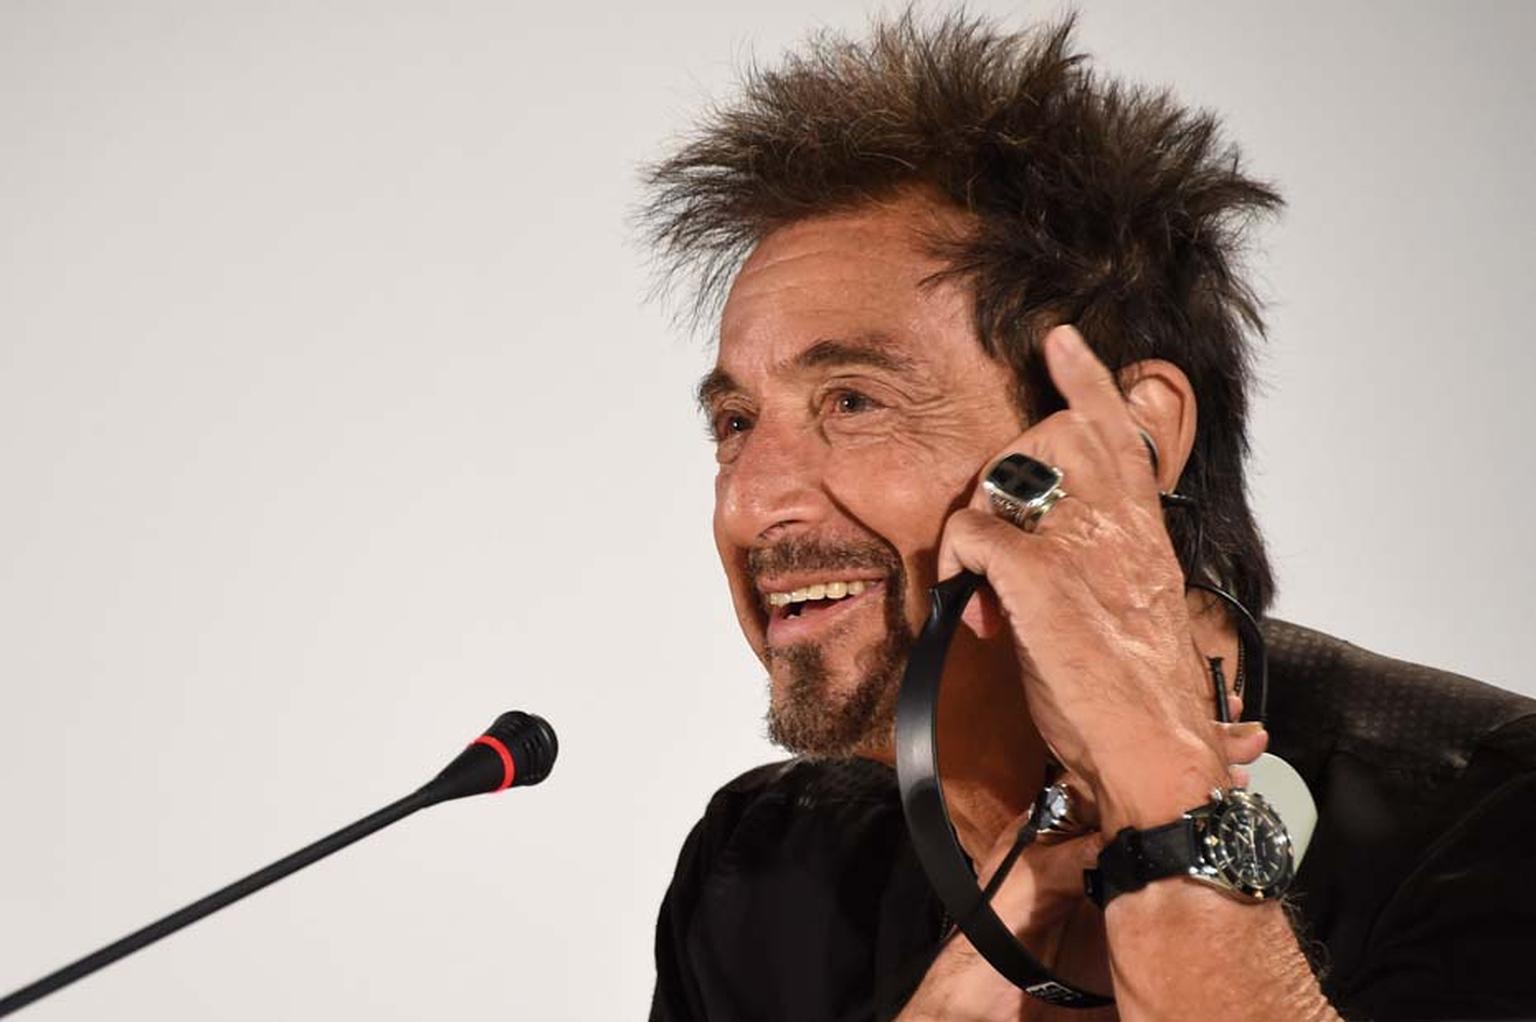 During the press conference to promote his films, The Humbling and Mangelhorn, Al Pacino was seen wearing a Jaeger-LeCoultre Deep Sea Vintage Chronograph watch.